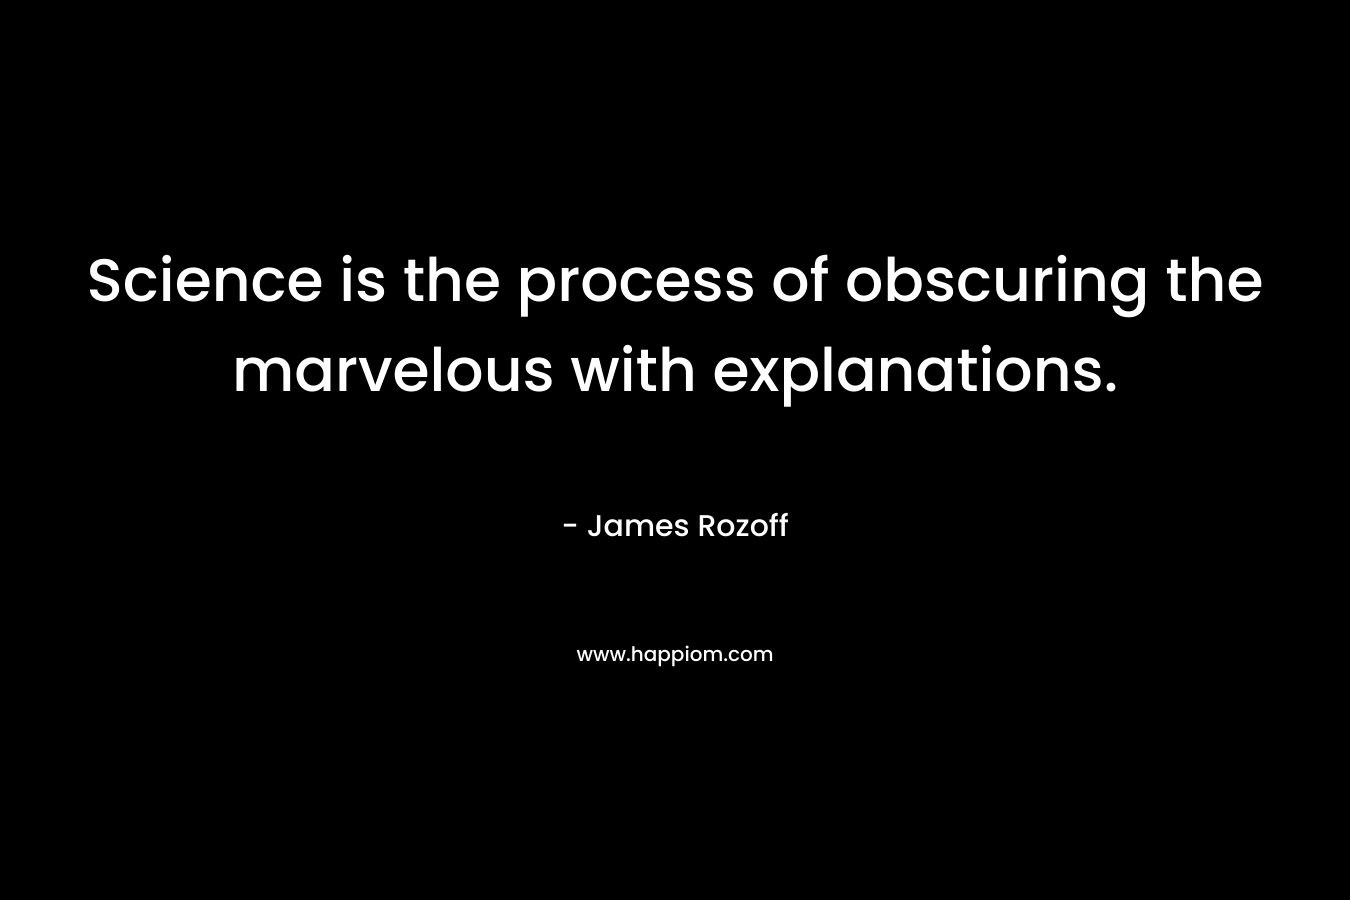 Science is the process of obscuring the marvelous with explanations.